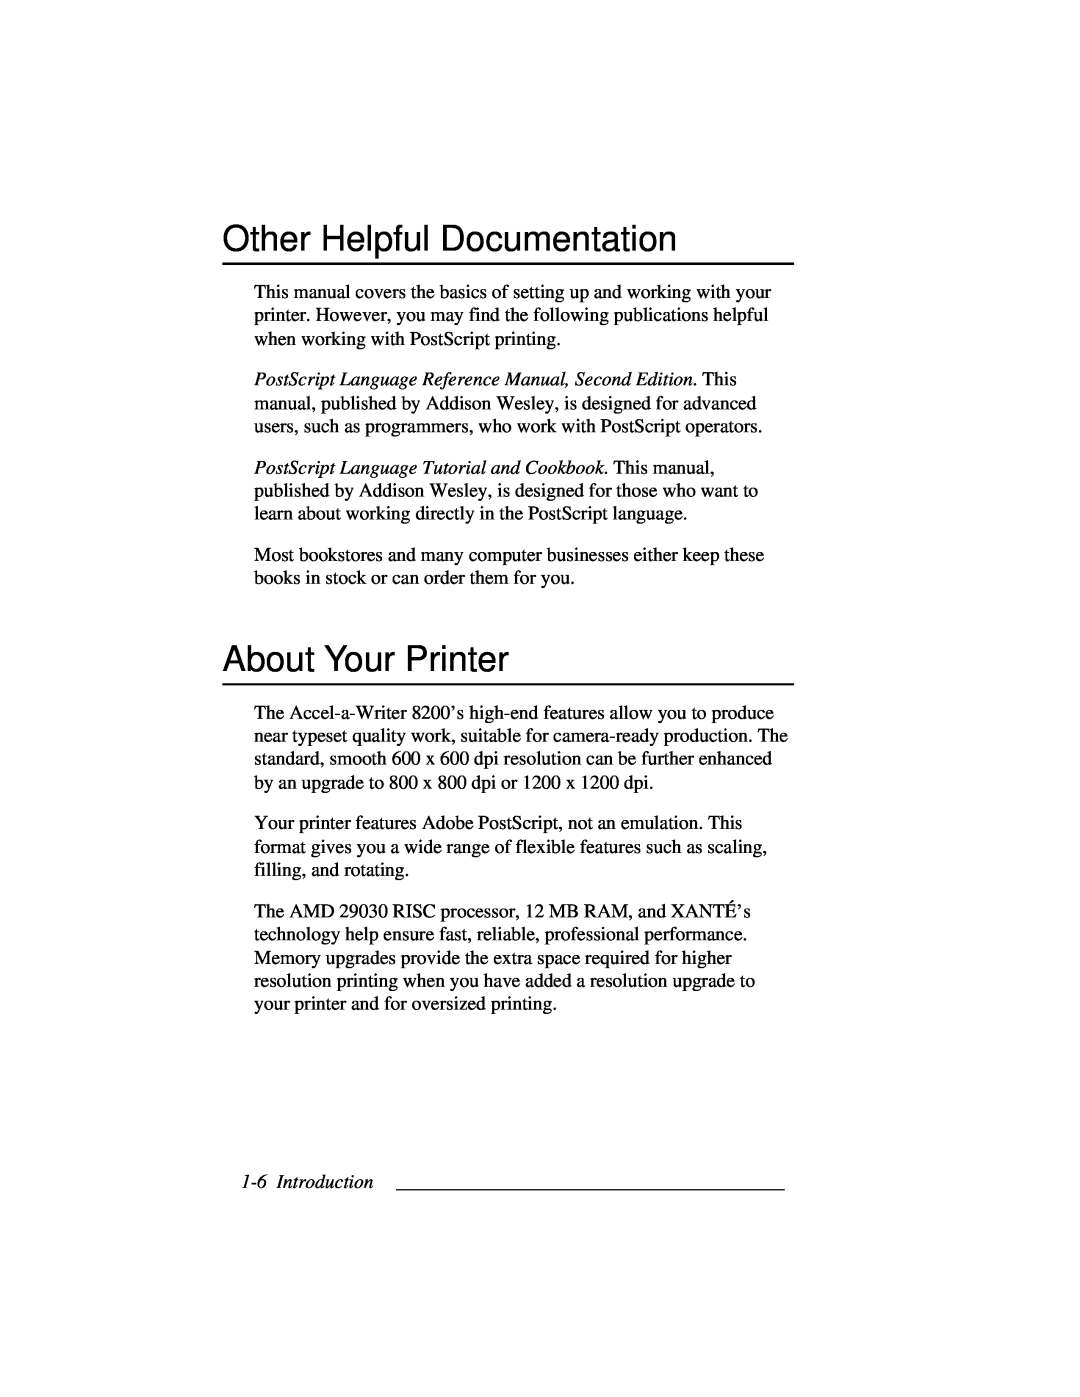 Accel 8200 manual Other Helpful Documentation, About Your Printer 